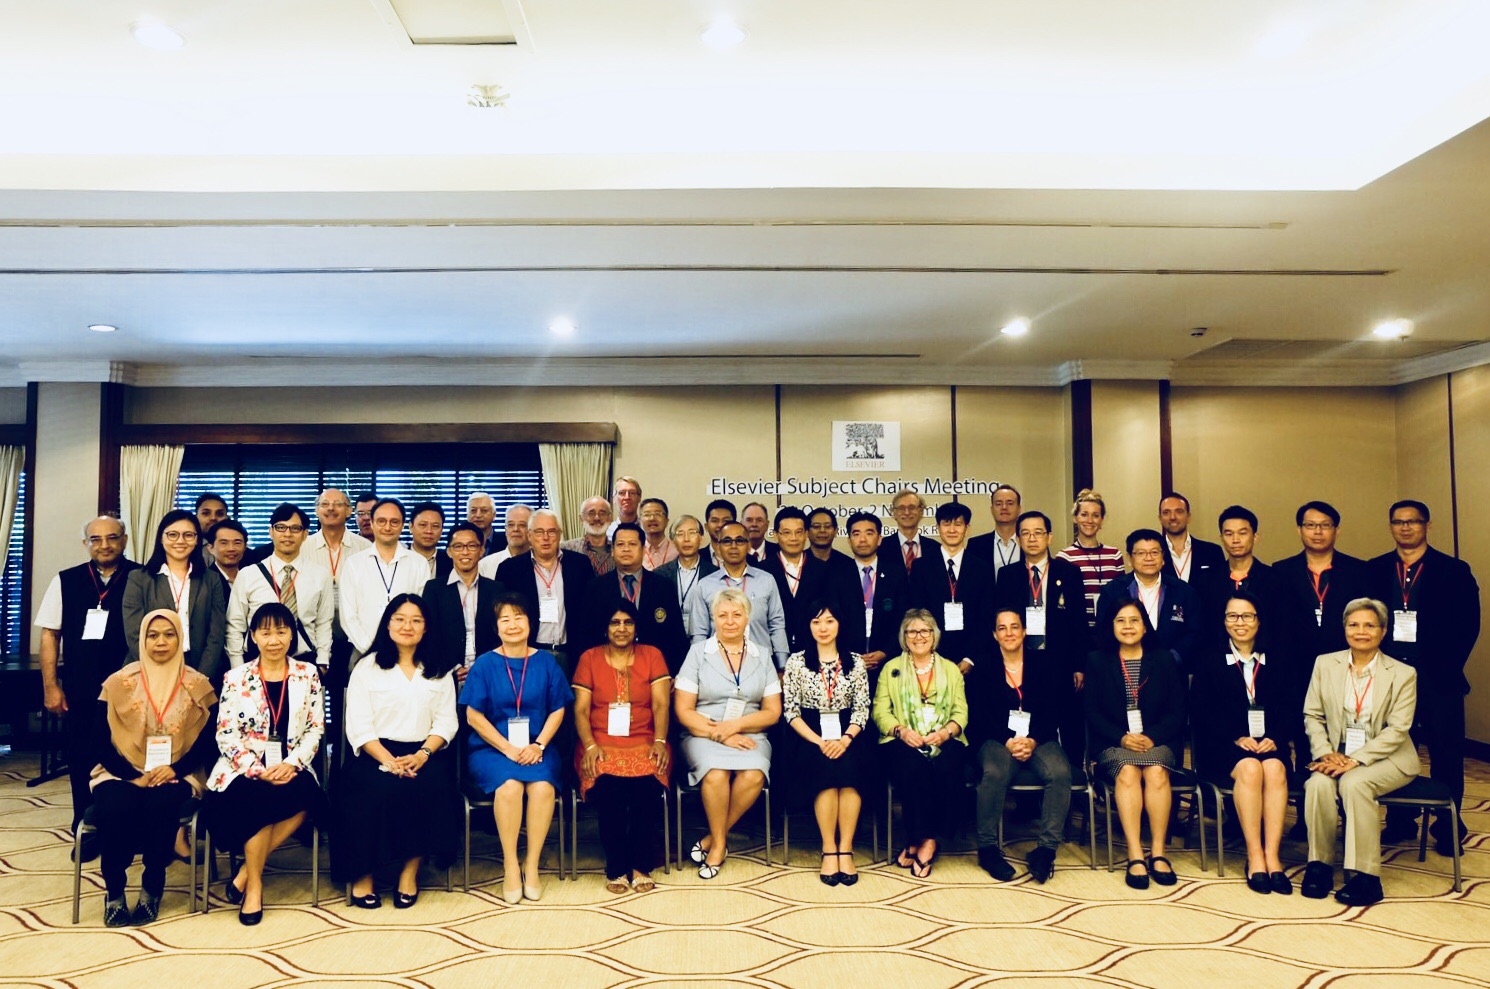 Siriraj Medical Journal at “Elsevier Subject Chairs Meeting: Thai Local Board Meets with SCOPUS Subject Chairs”